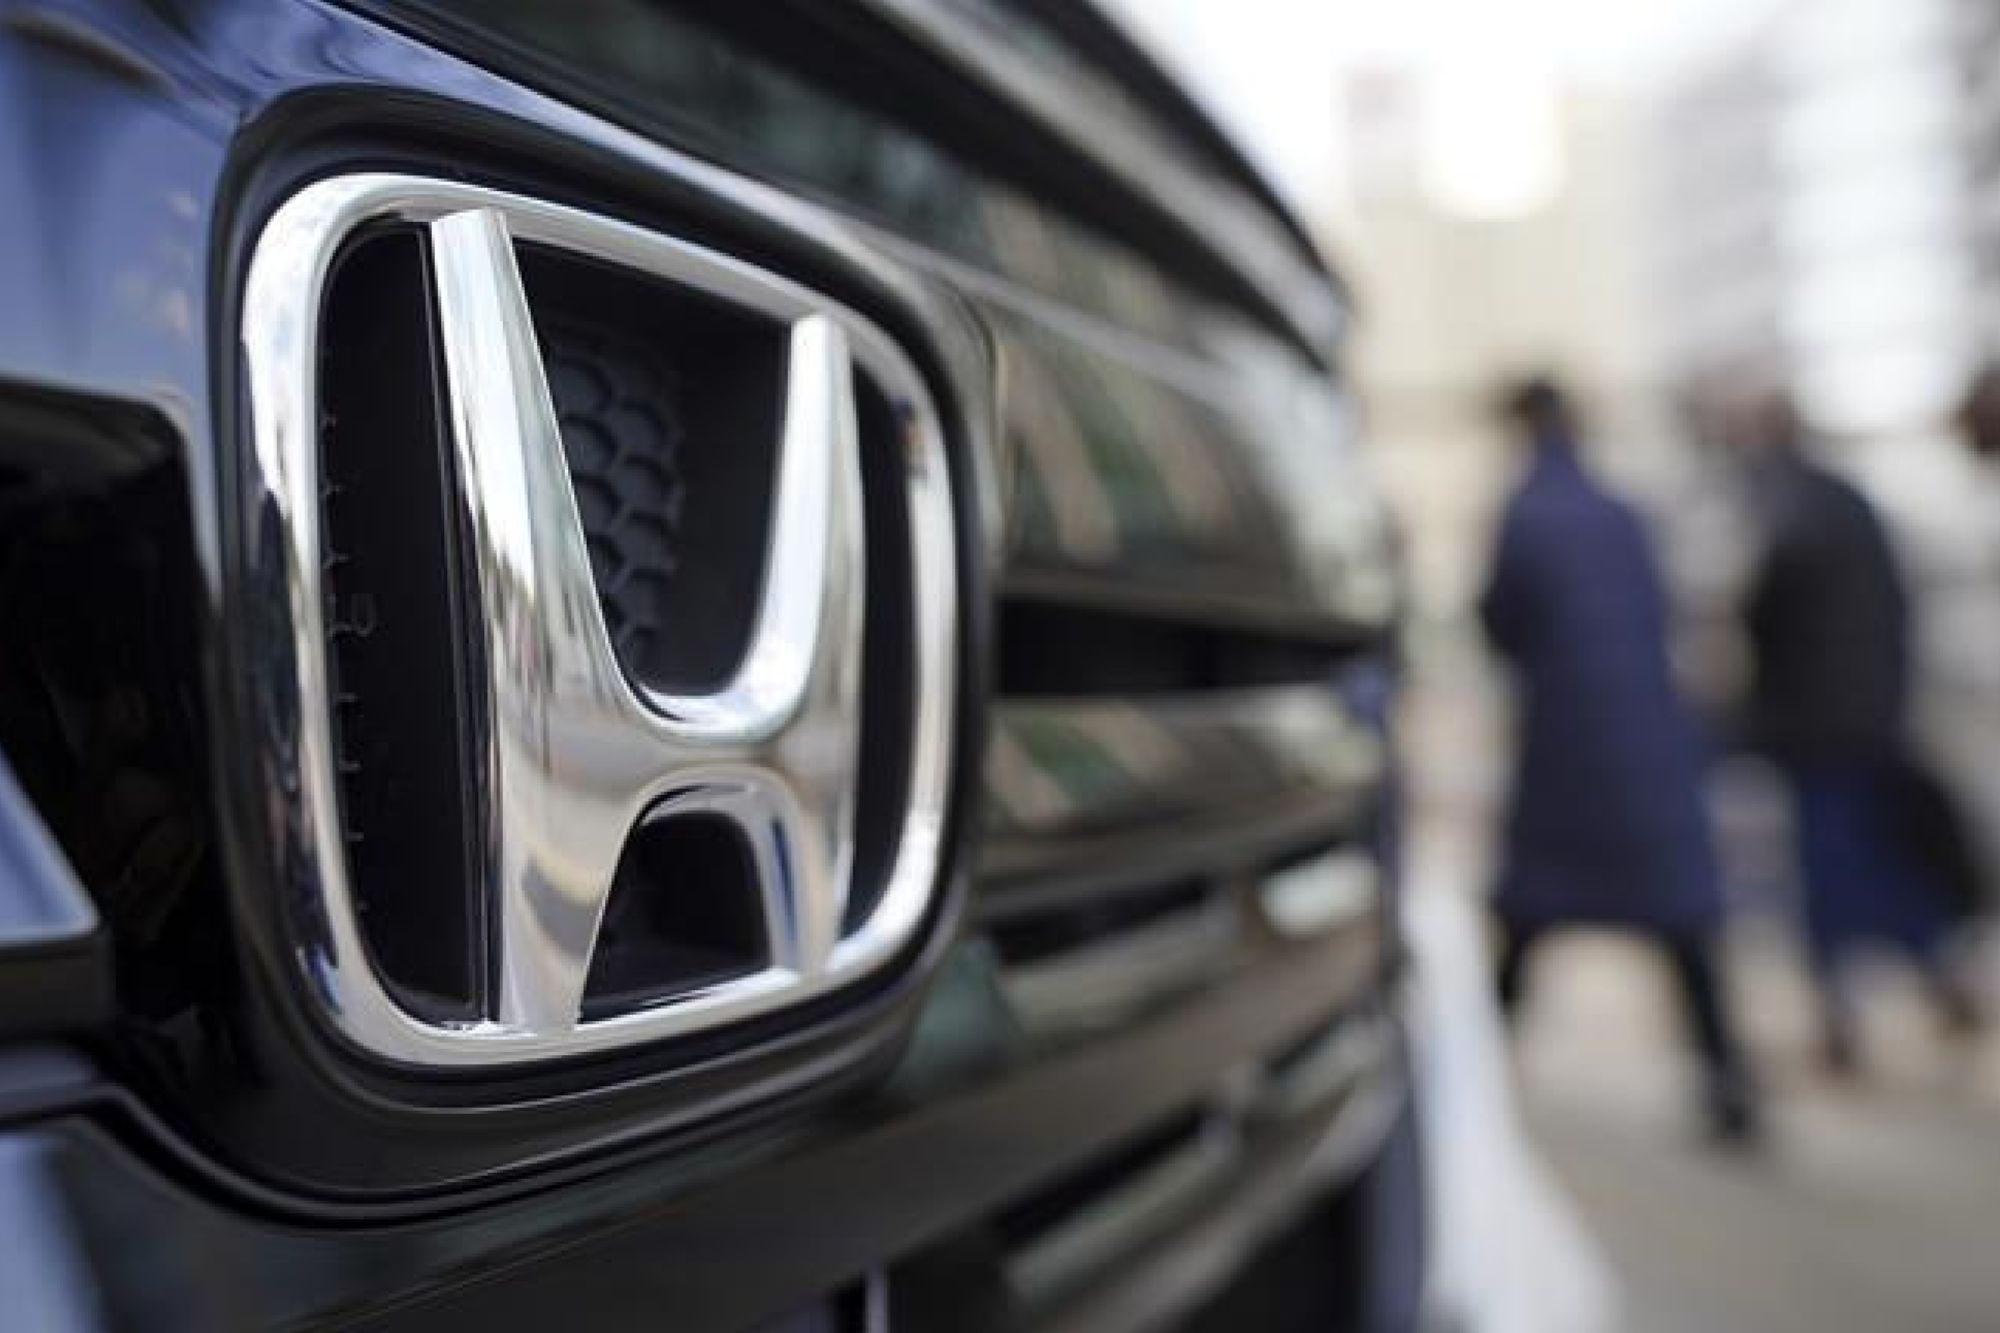 Honda considering $18.4 bn investment in Canadian electric vehicle plant